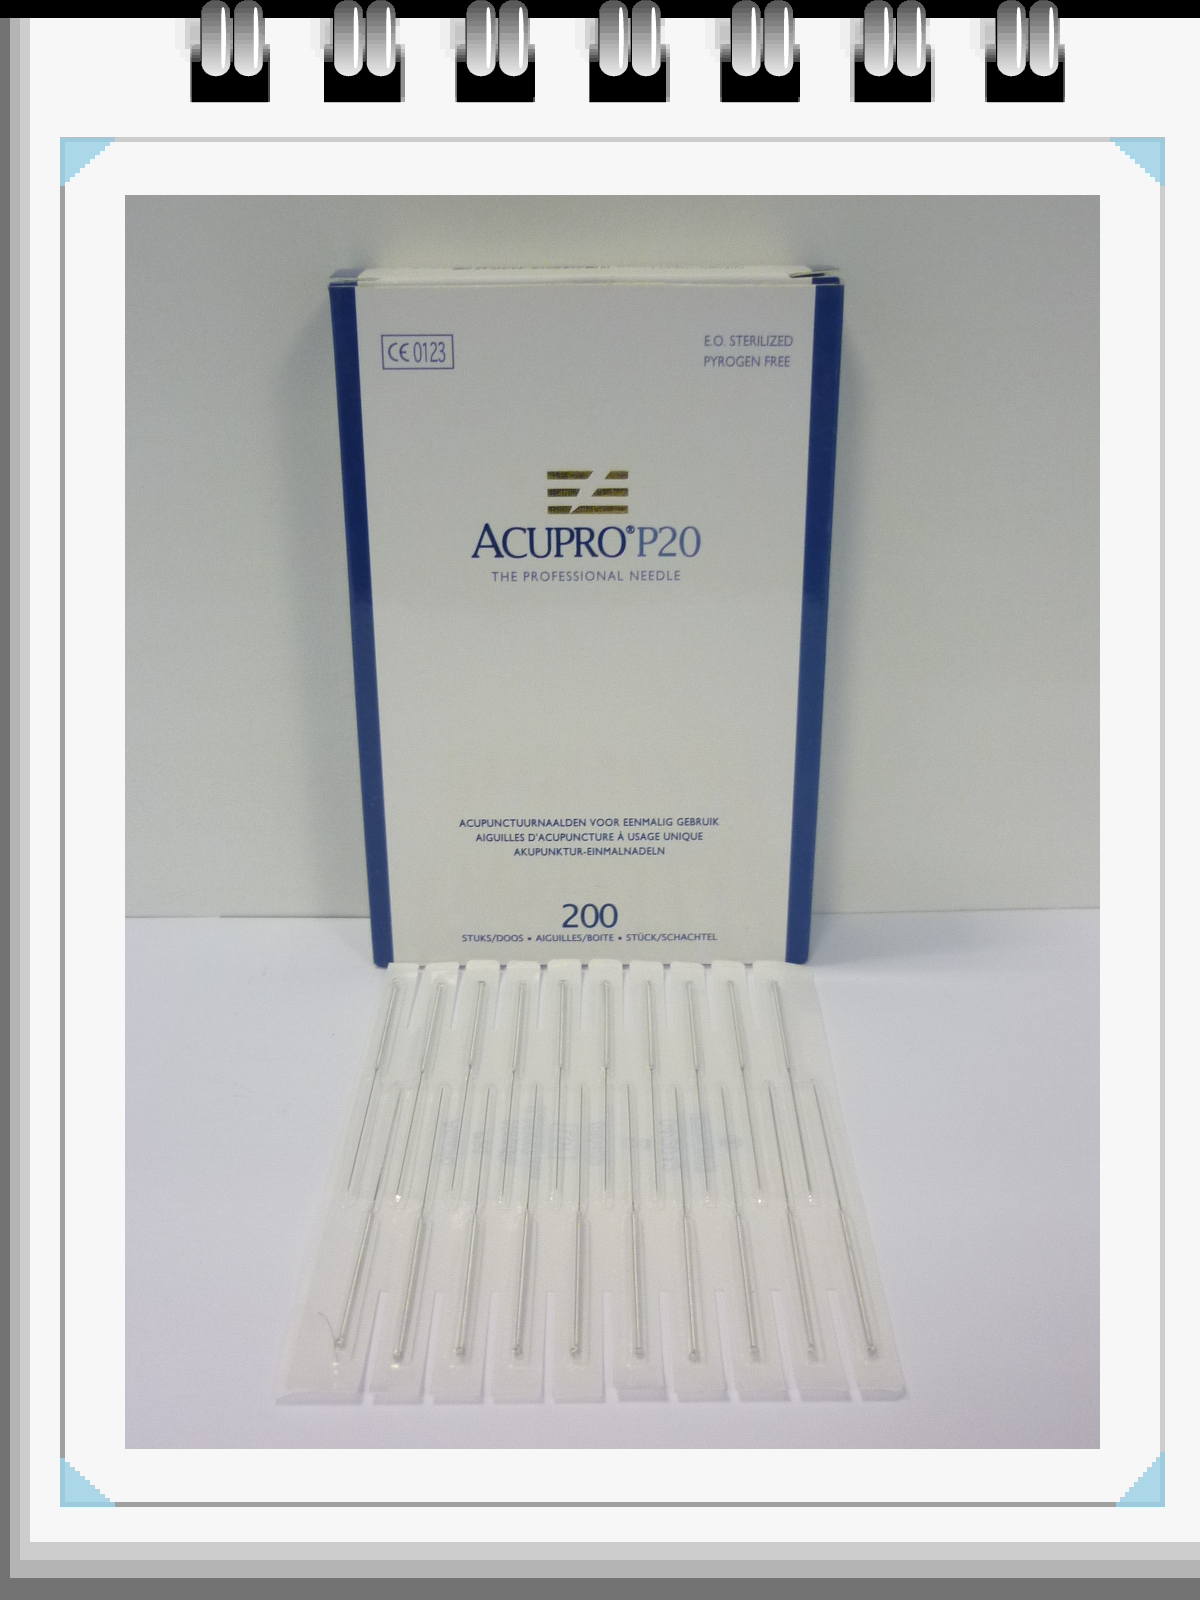 All Products - acupunctuur naalden   0,25 x 100 mm   p--100